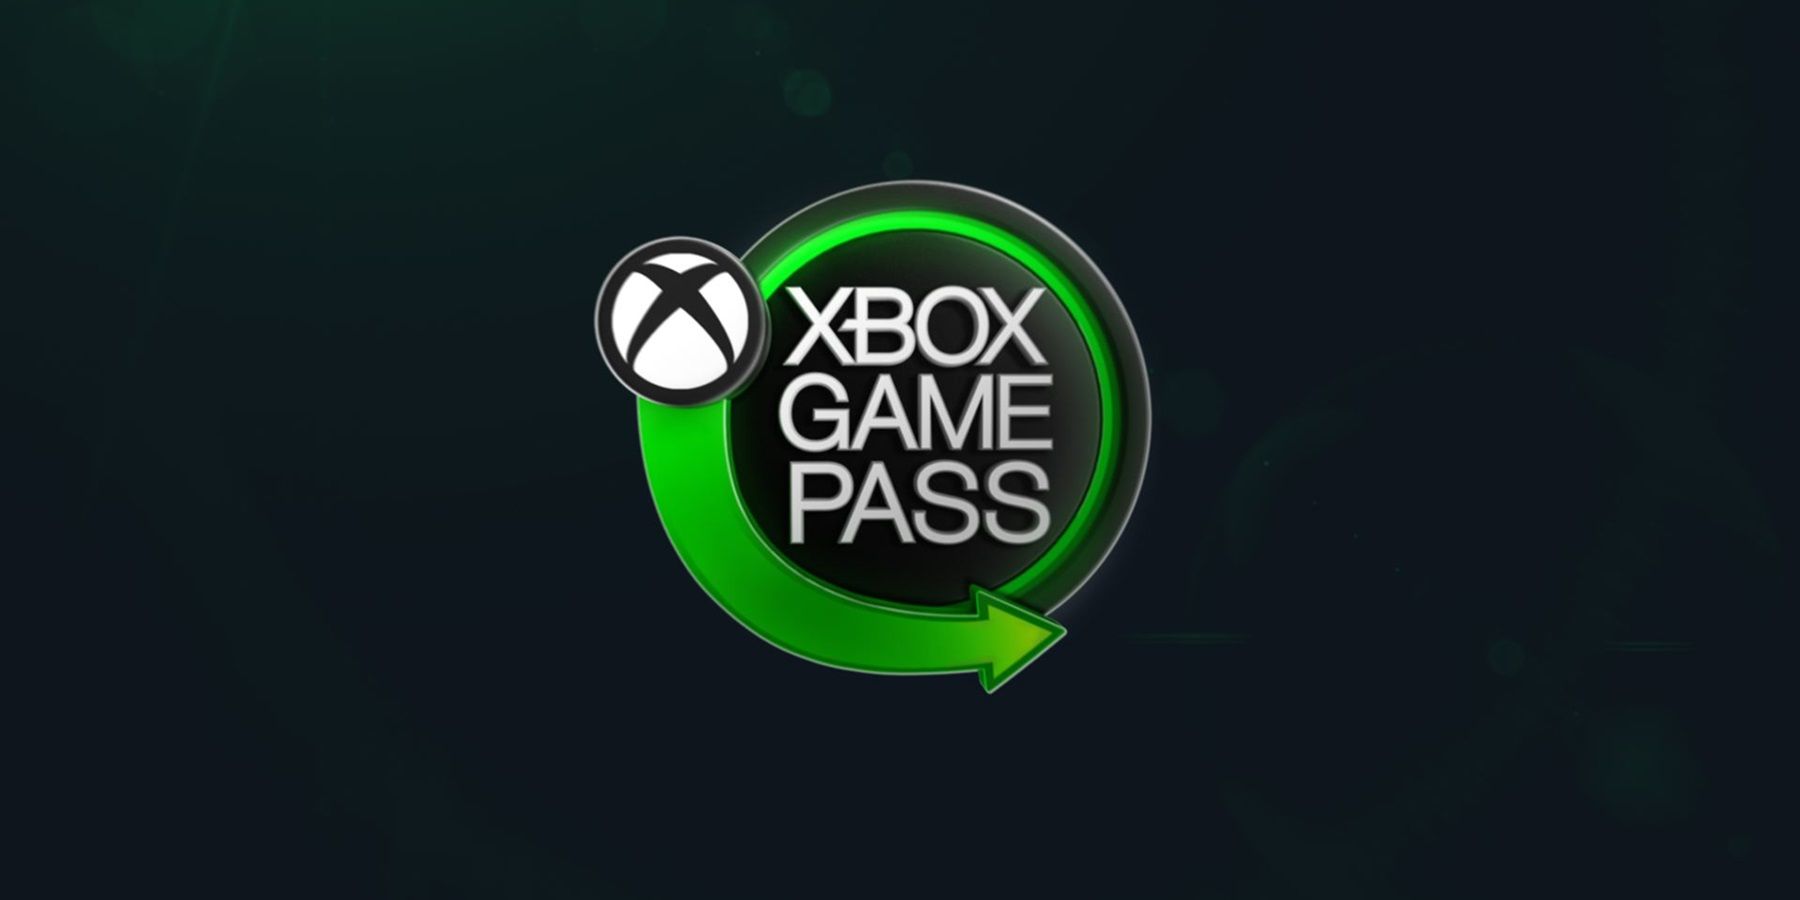 December 5 is Going to Be a Big Day for Xbox Game Pass